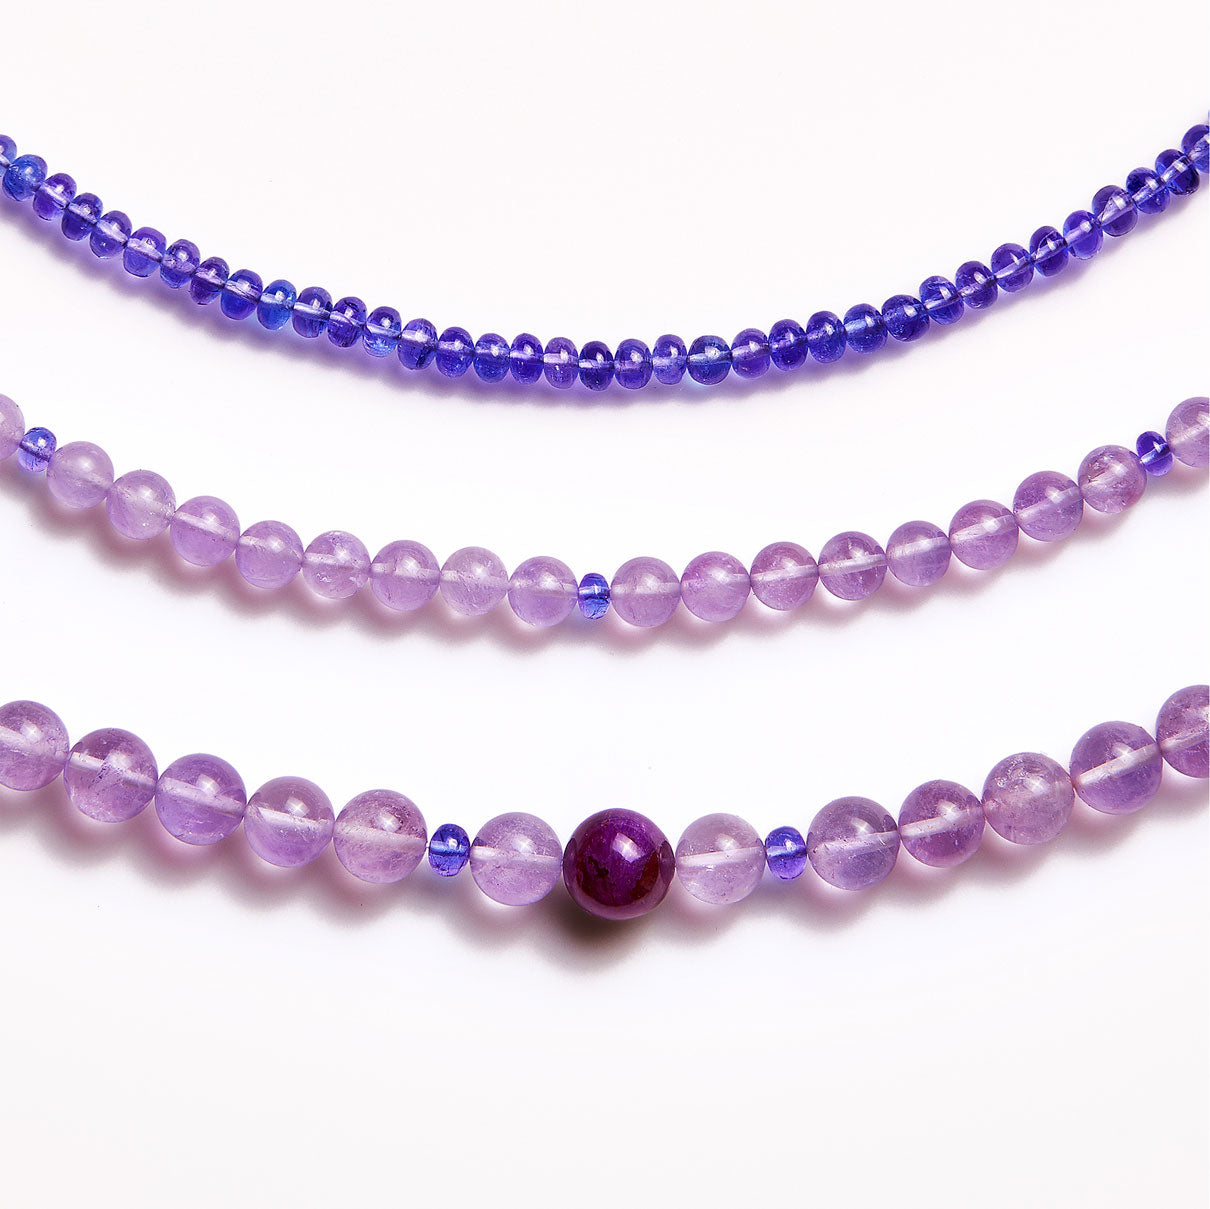 Three different crystal healing gemstone necklaces with Tanzanite 